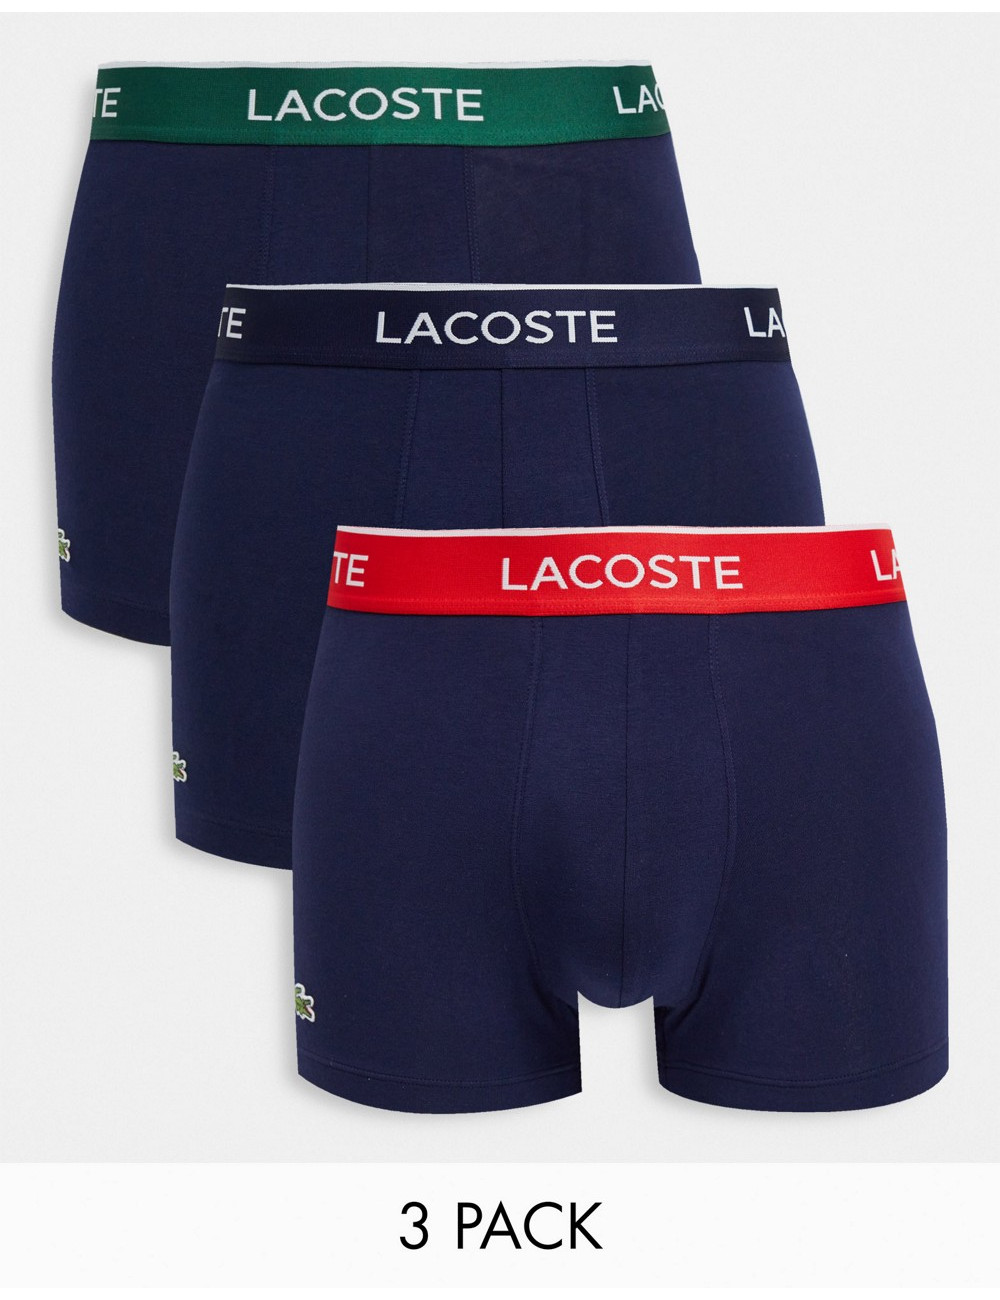 Lacoste 3 pack trunks with...